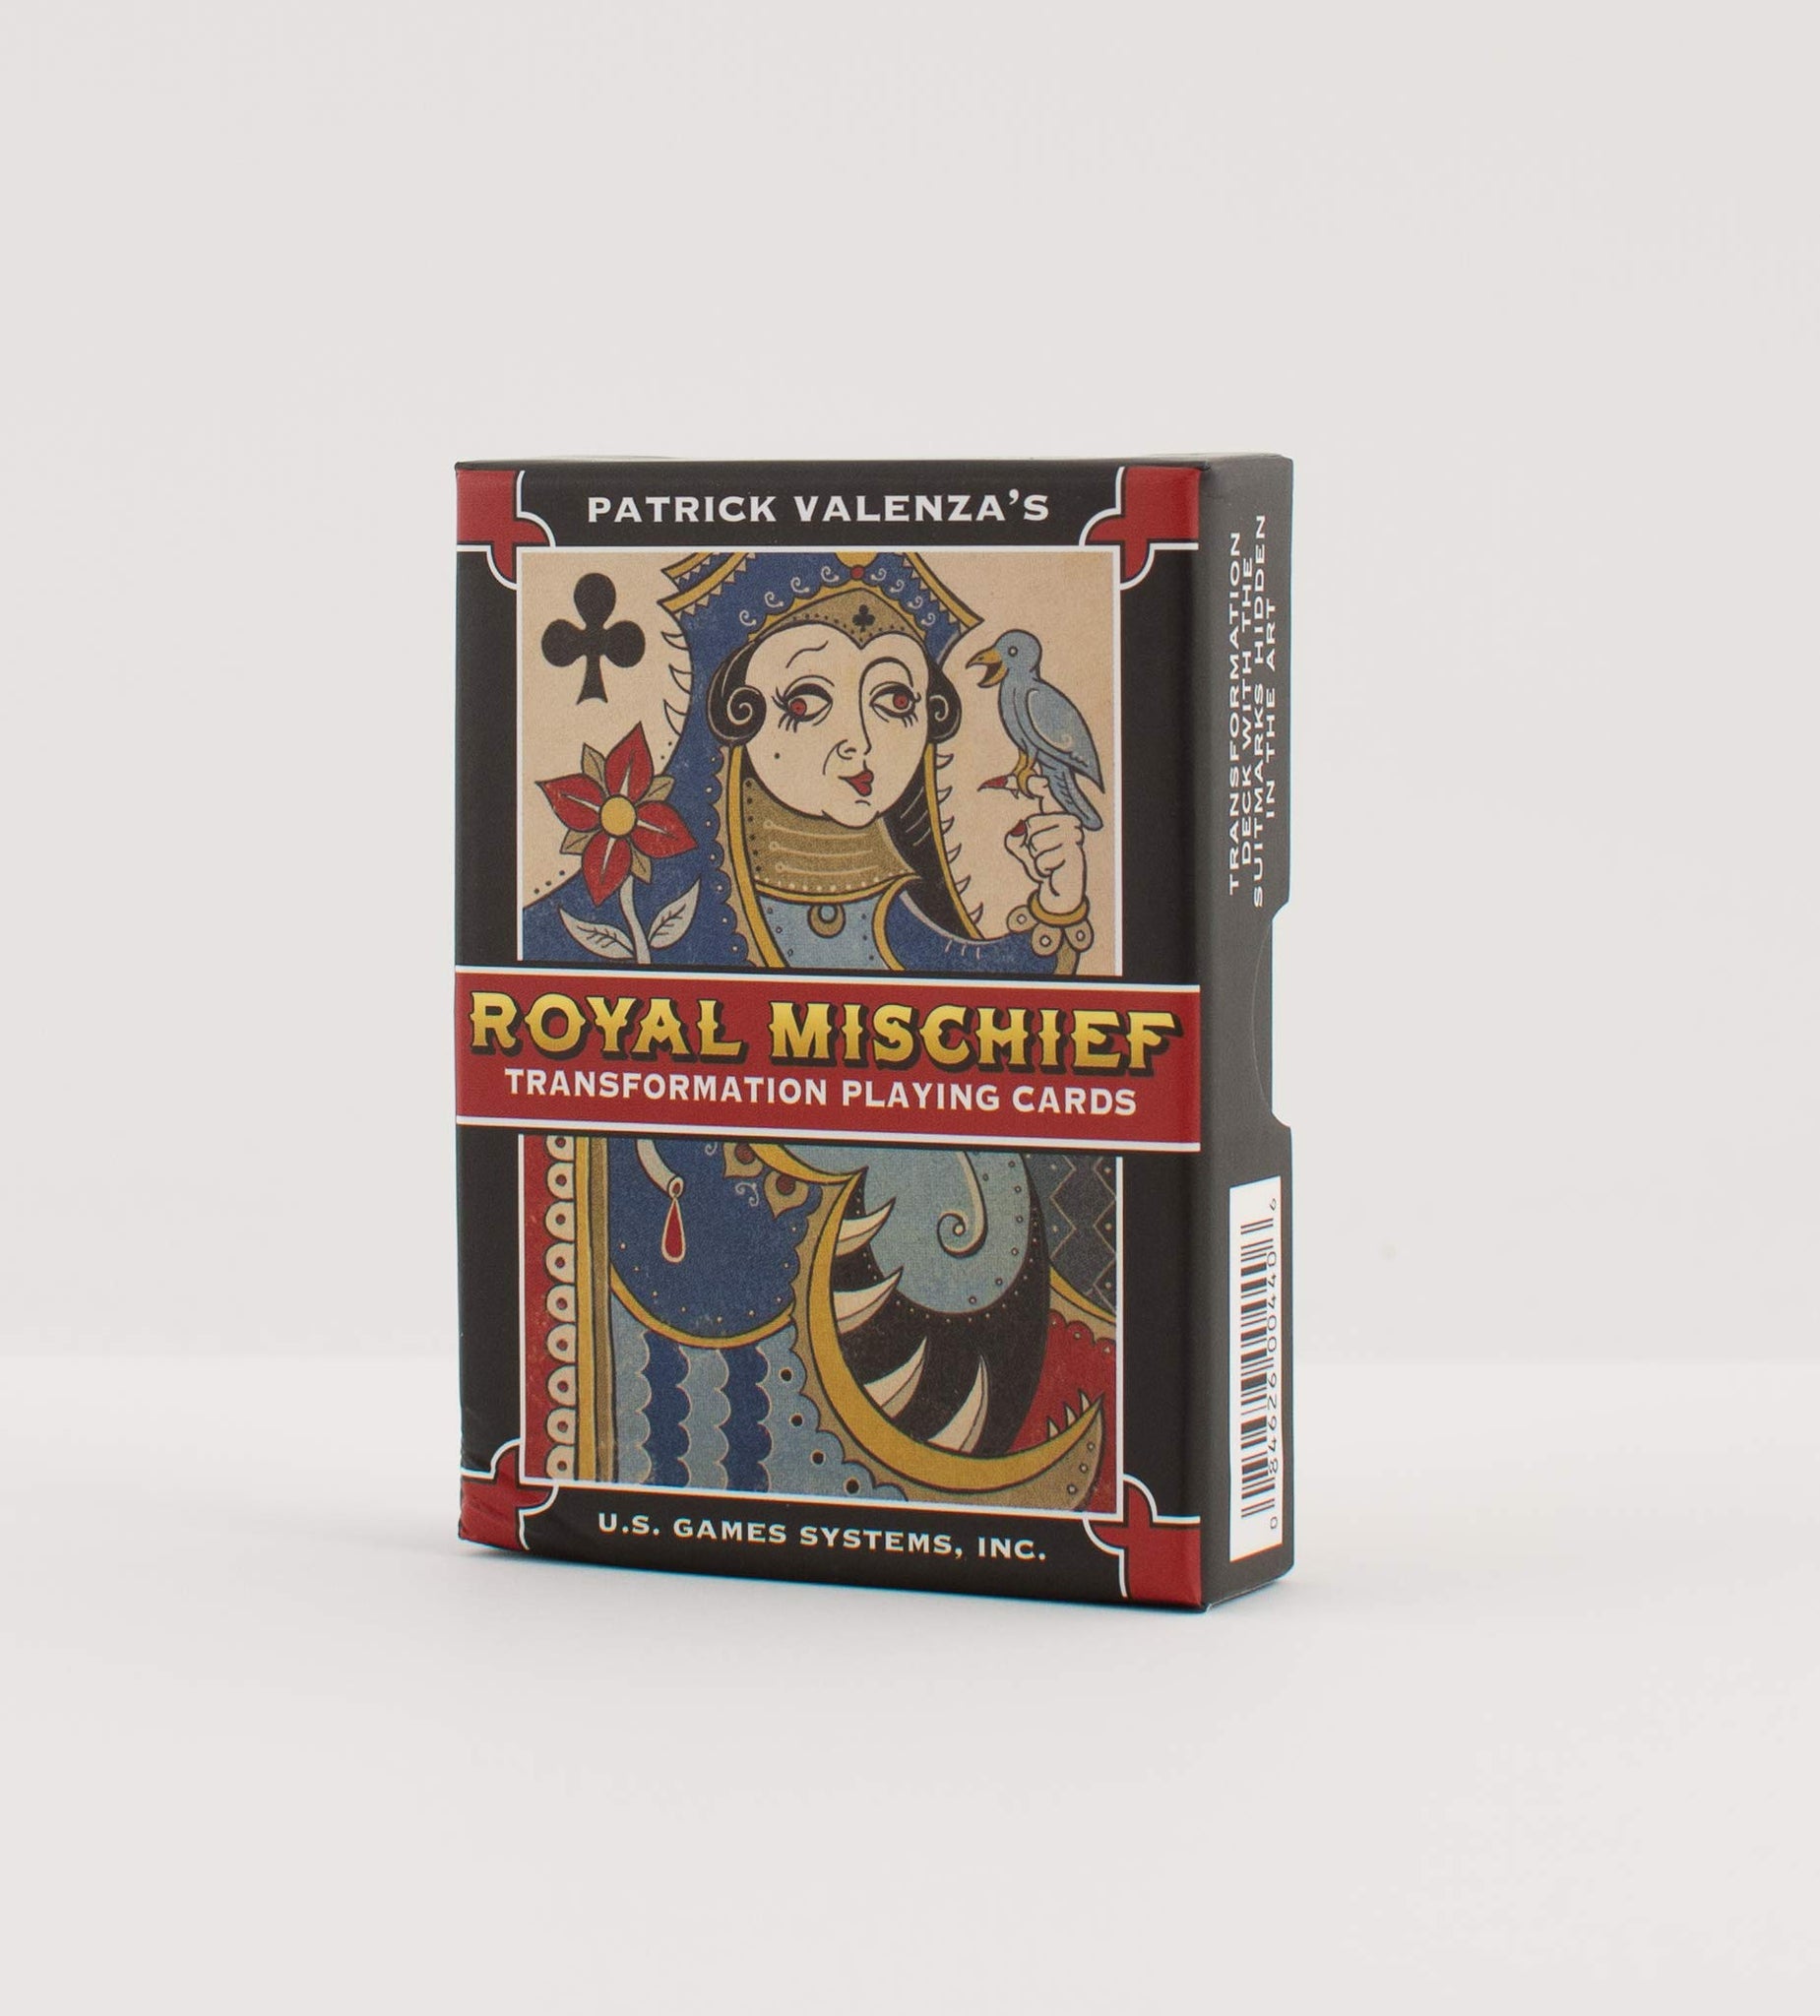 Royal Mischief Playing Cards by Patrick Valenza